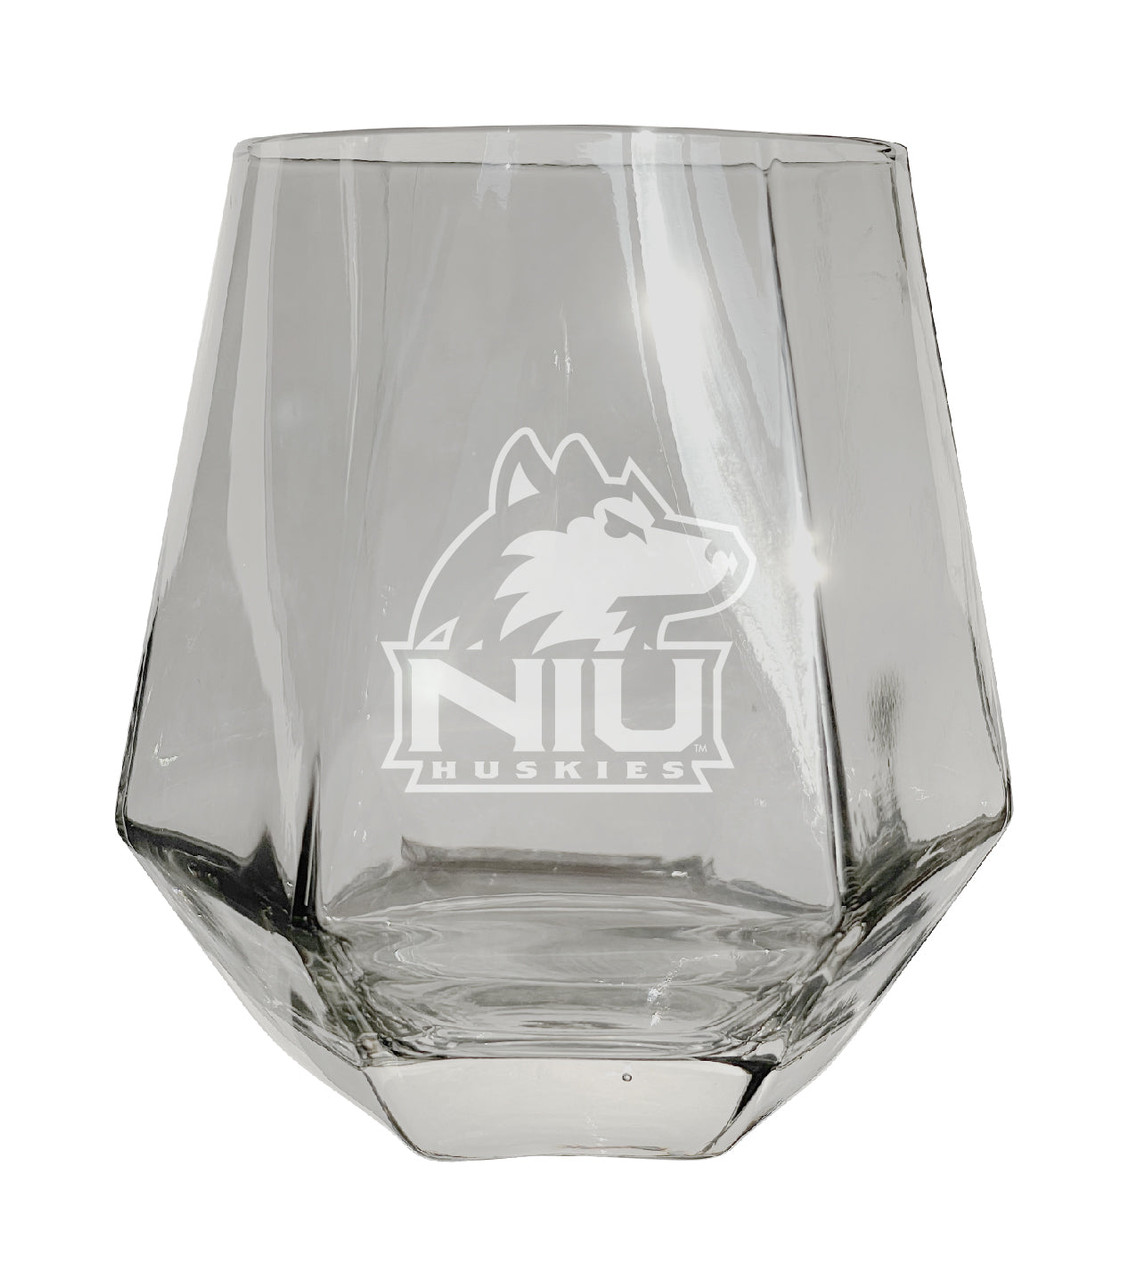 Northern Illinois Huskies Etched Diamond Cut Stemless 10 ounce Wine Glass Clear